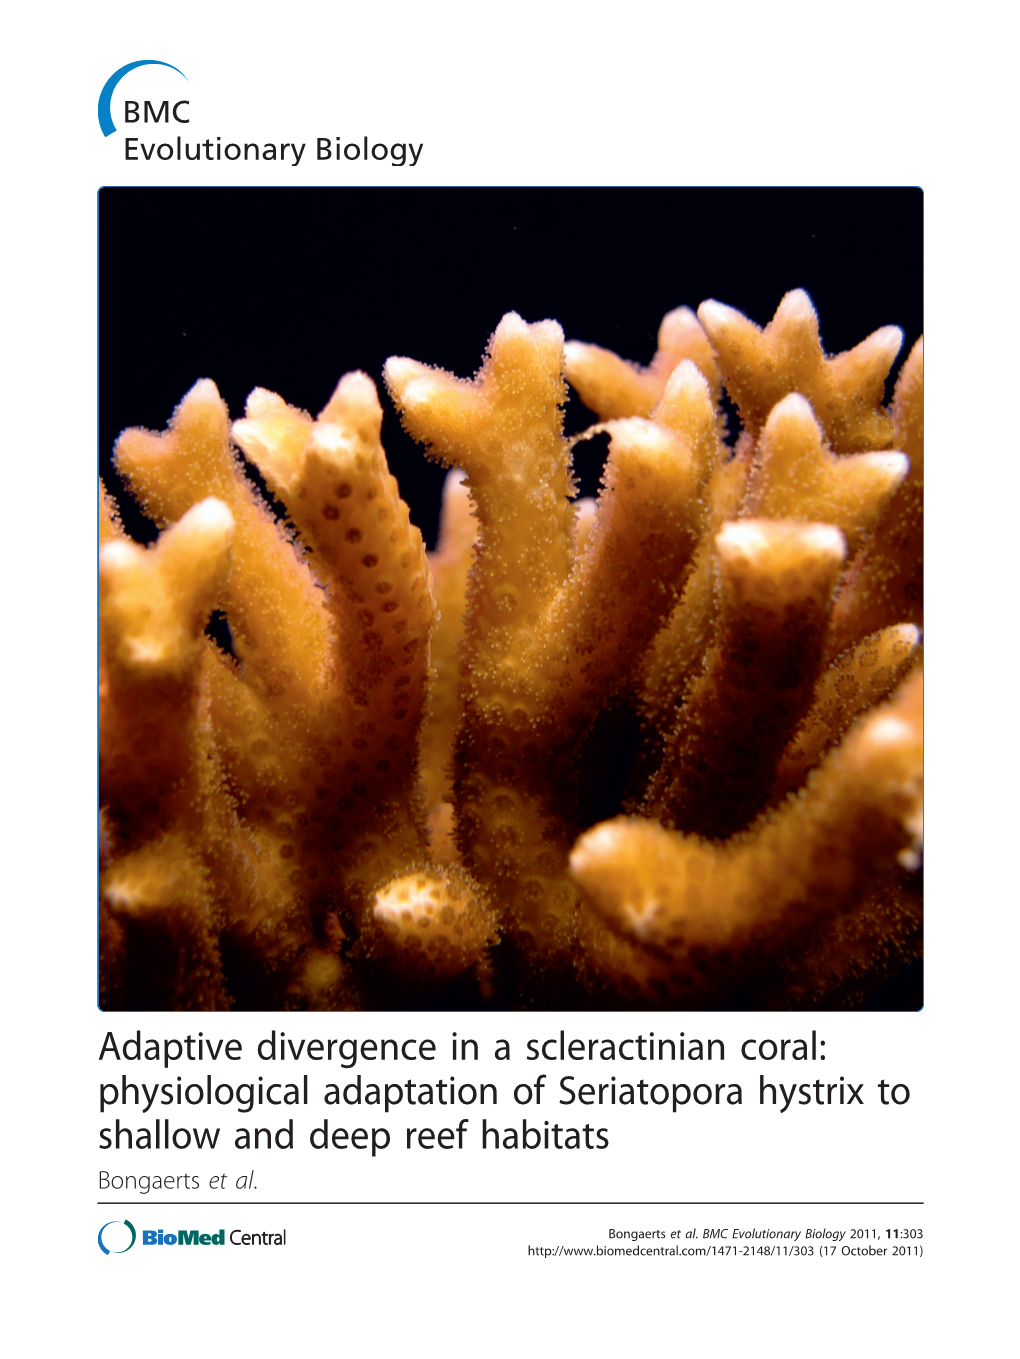 Adaptive Divergence in a Scleractinian Coral: Physiological Adaptation of Seriatopora Hystrix to Shallow and Deep Reef Habitats Bongaerts Et Al